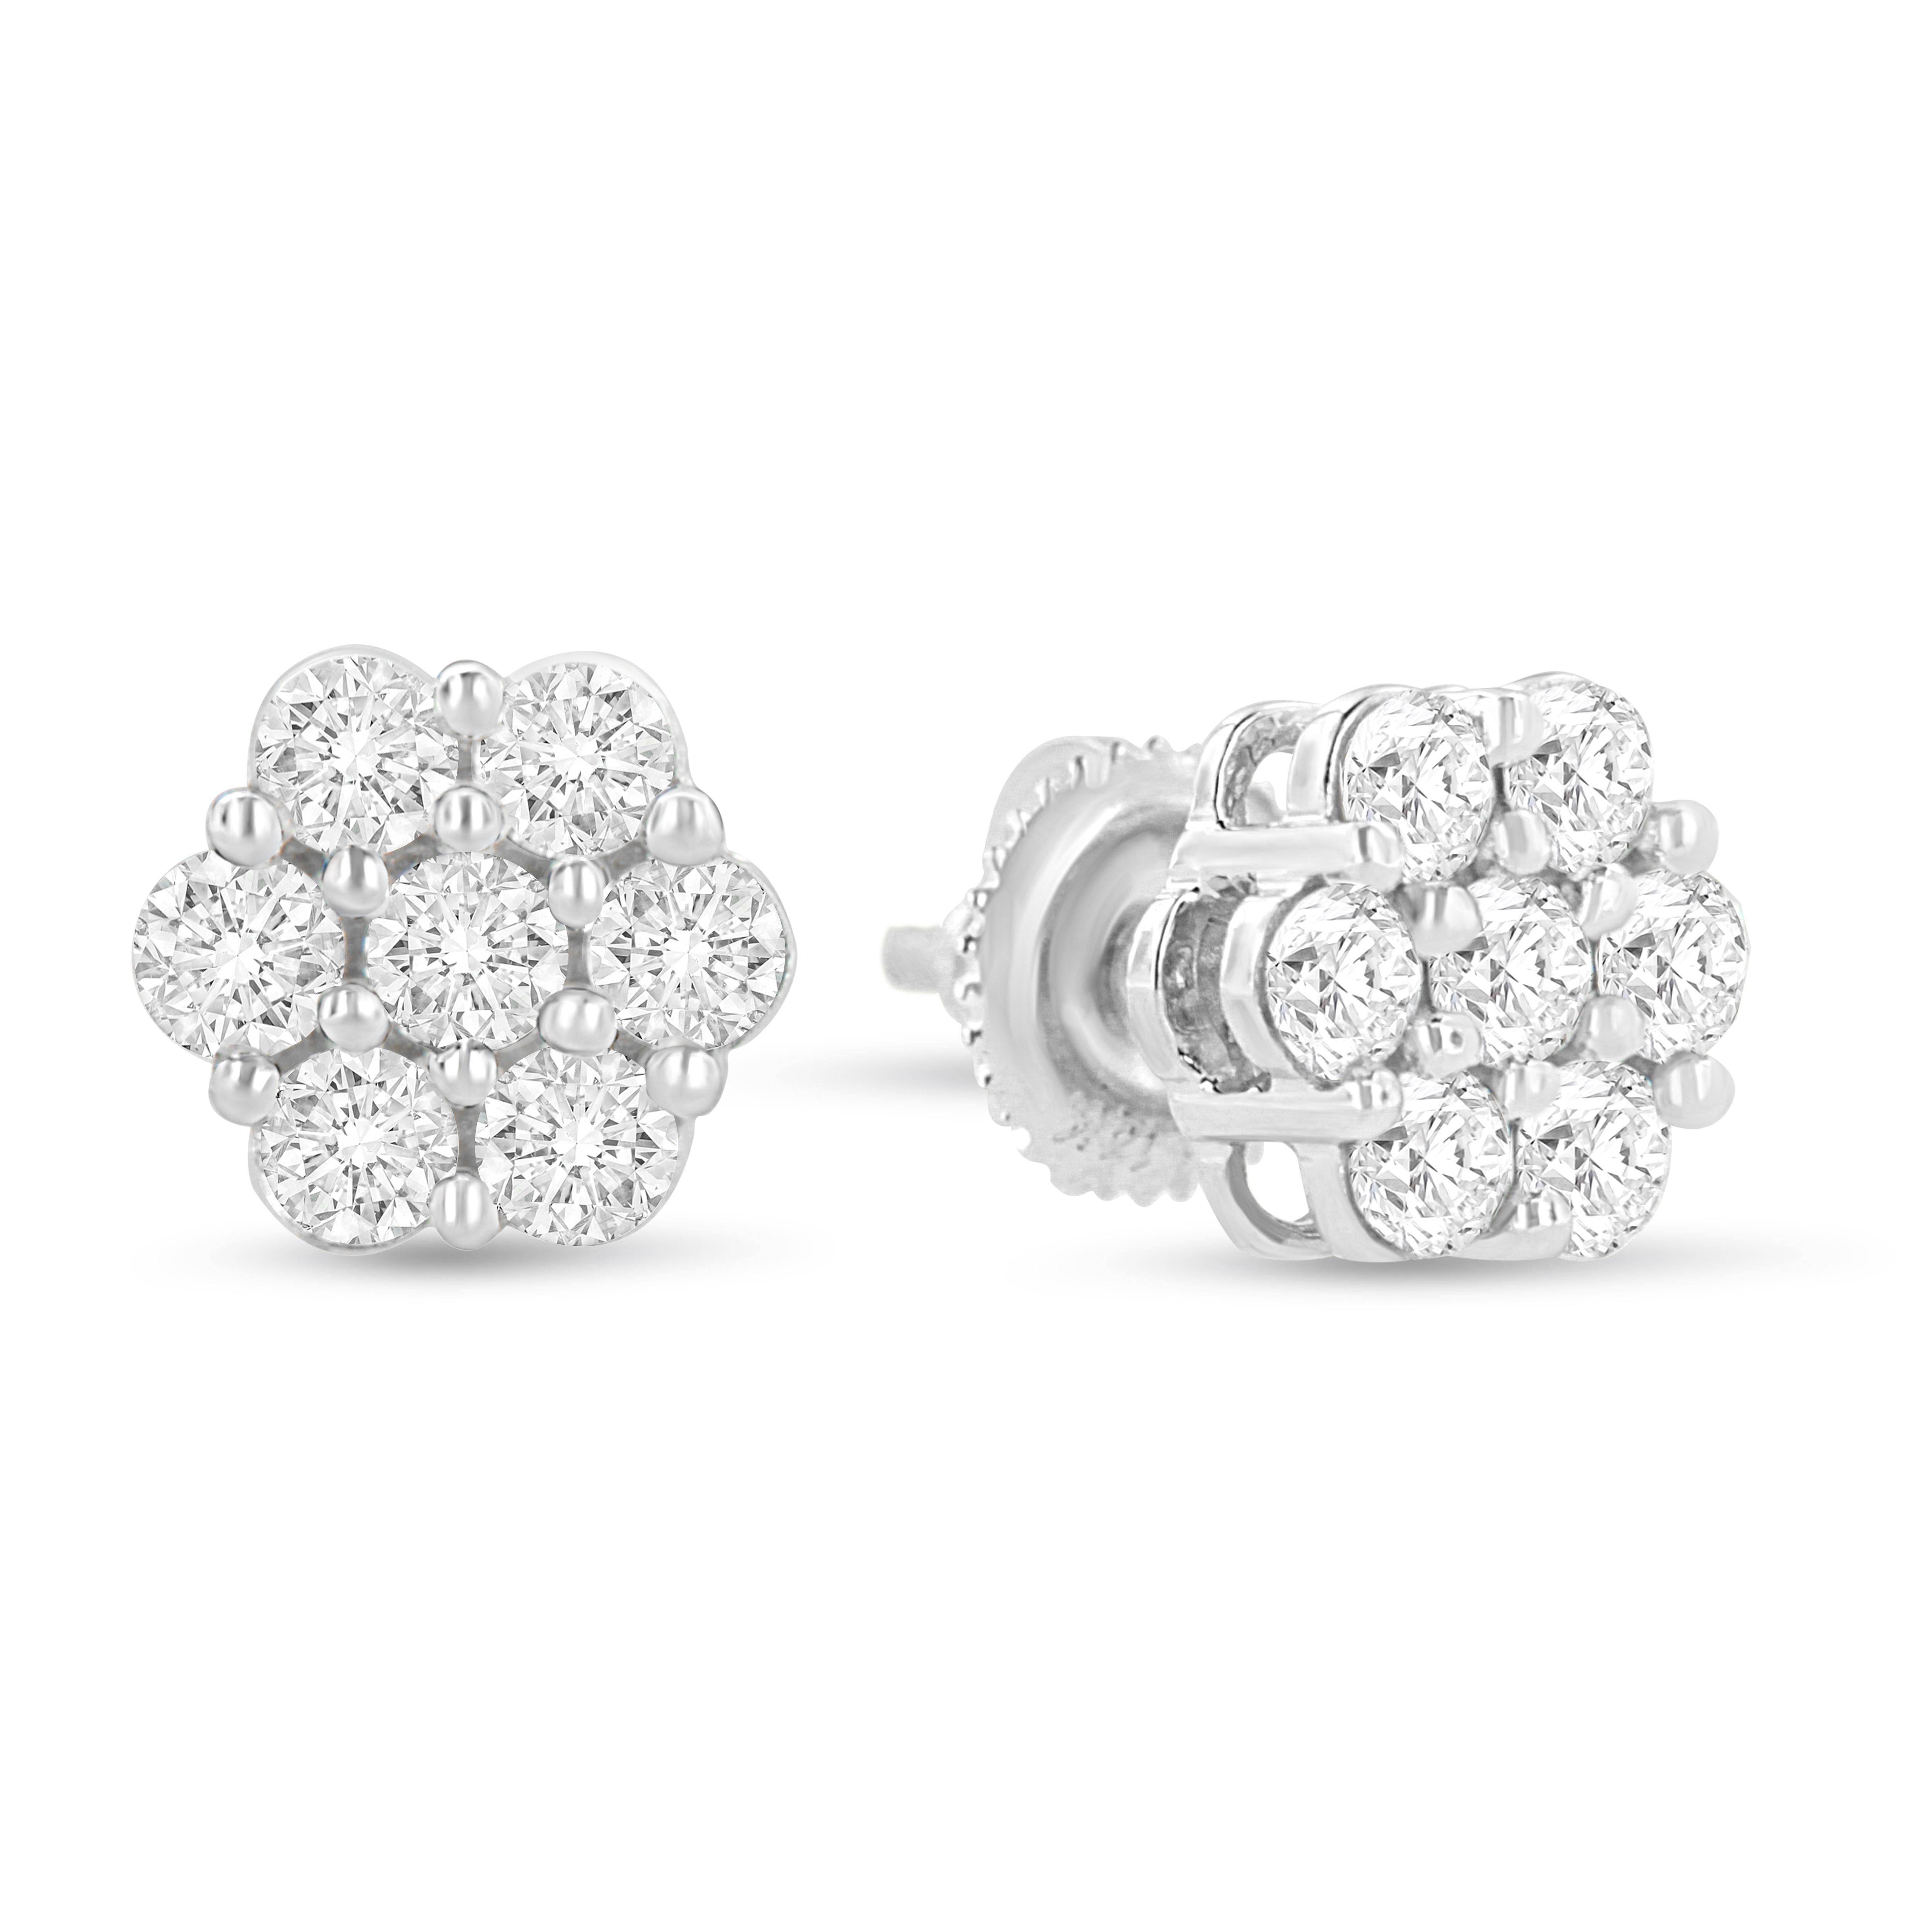 Modern 14K White Gold 1 1/2 cttw Round-Cut Diamond Floral Cluster Stud Earrings For Sale